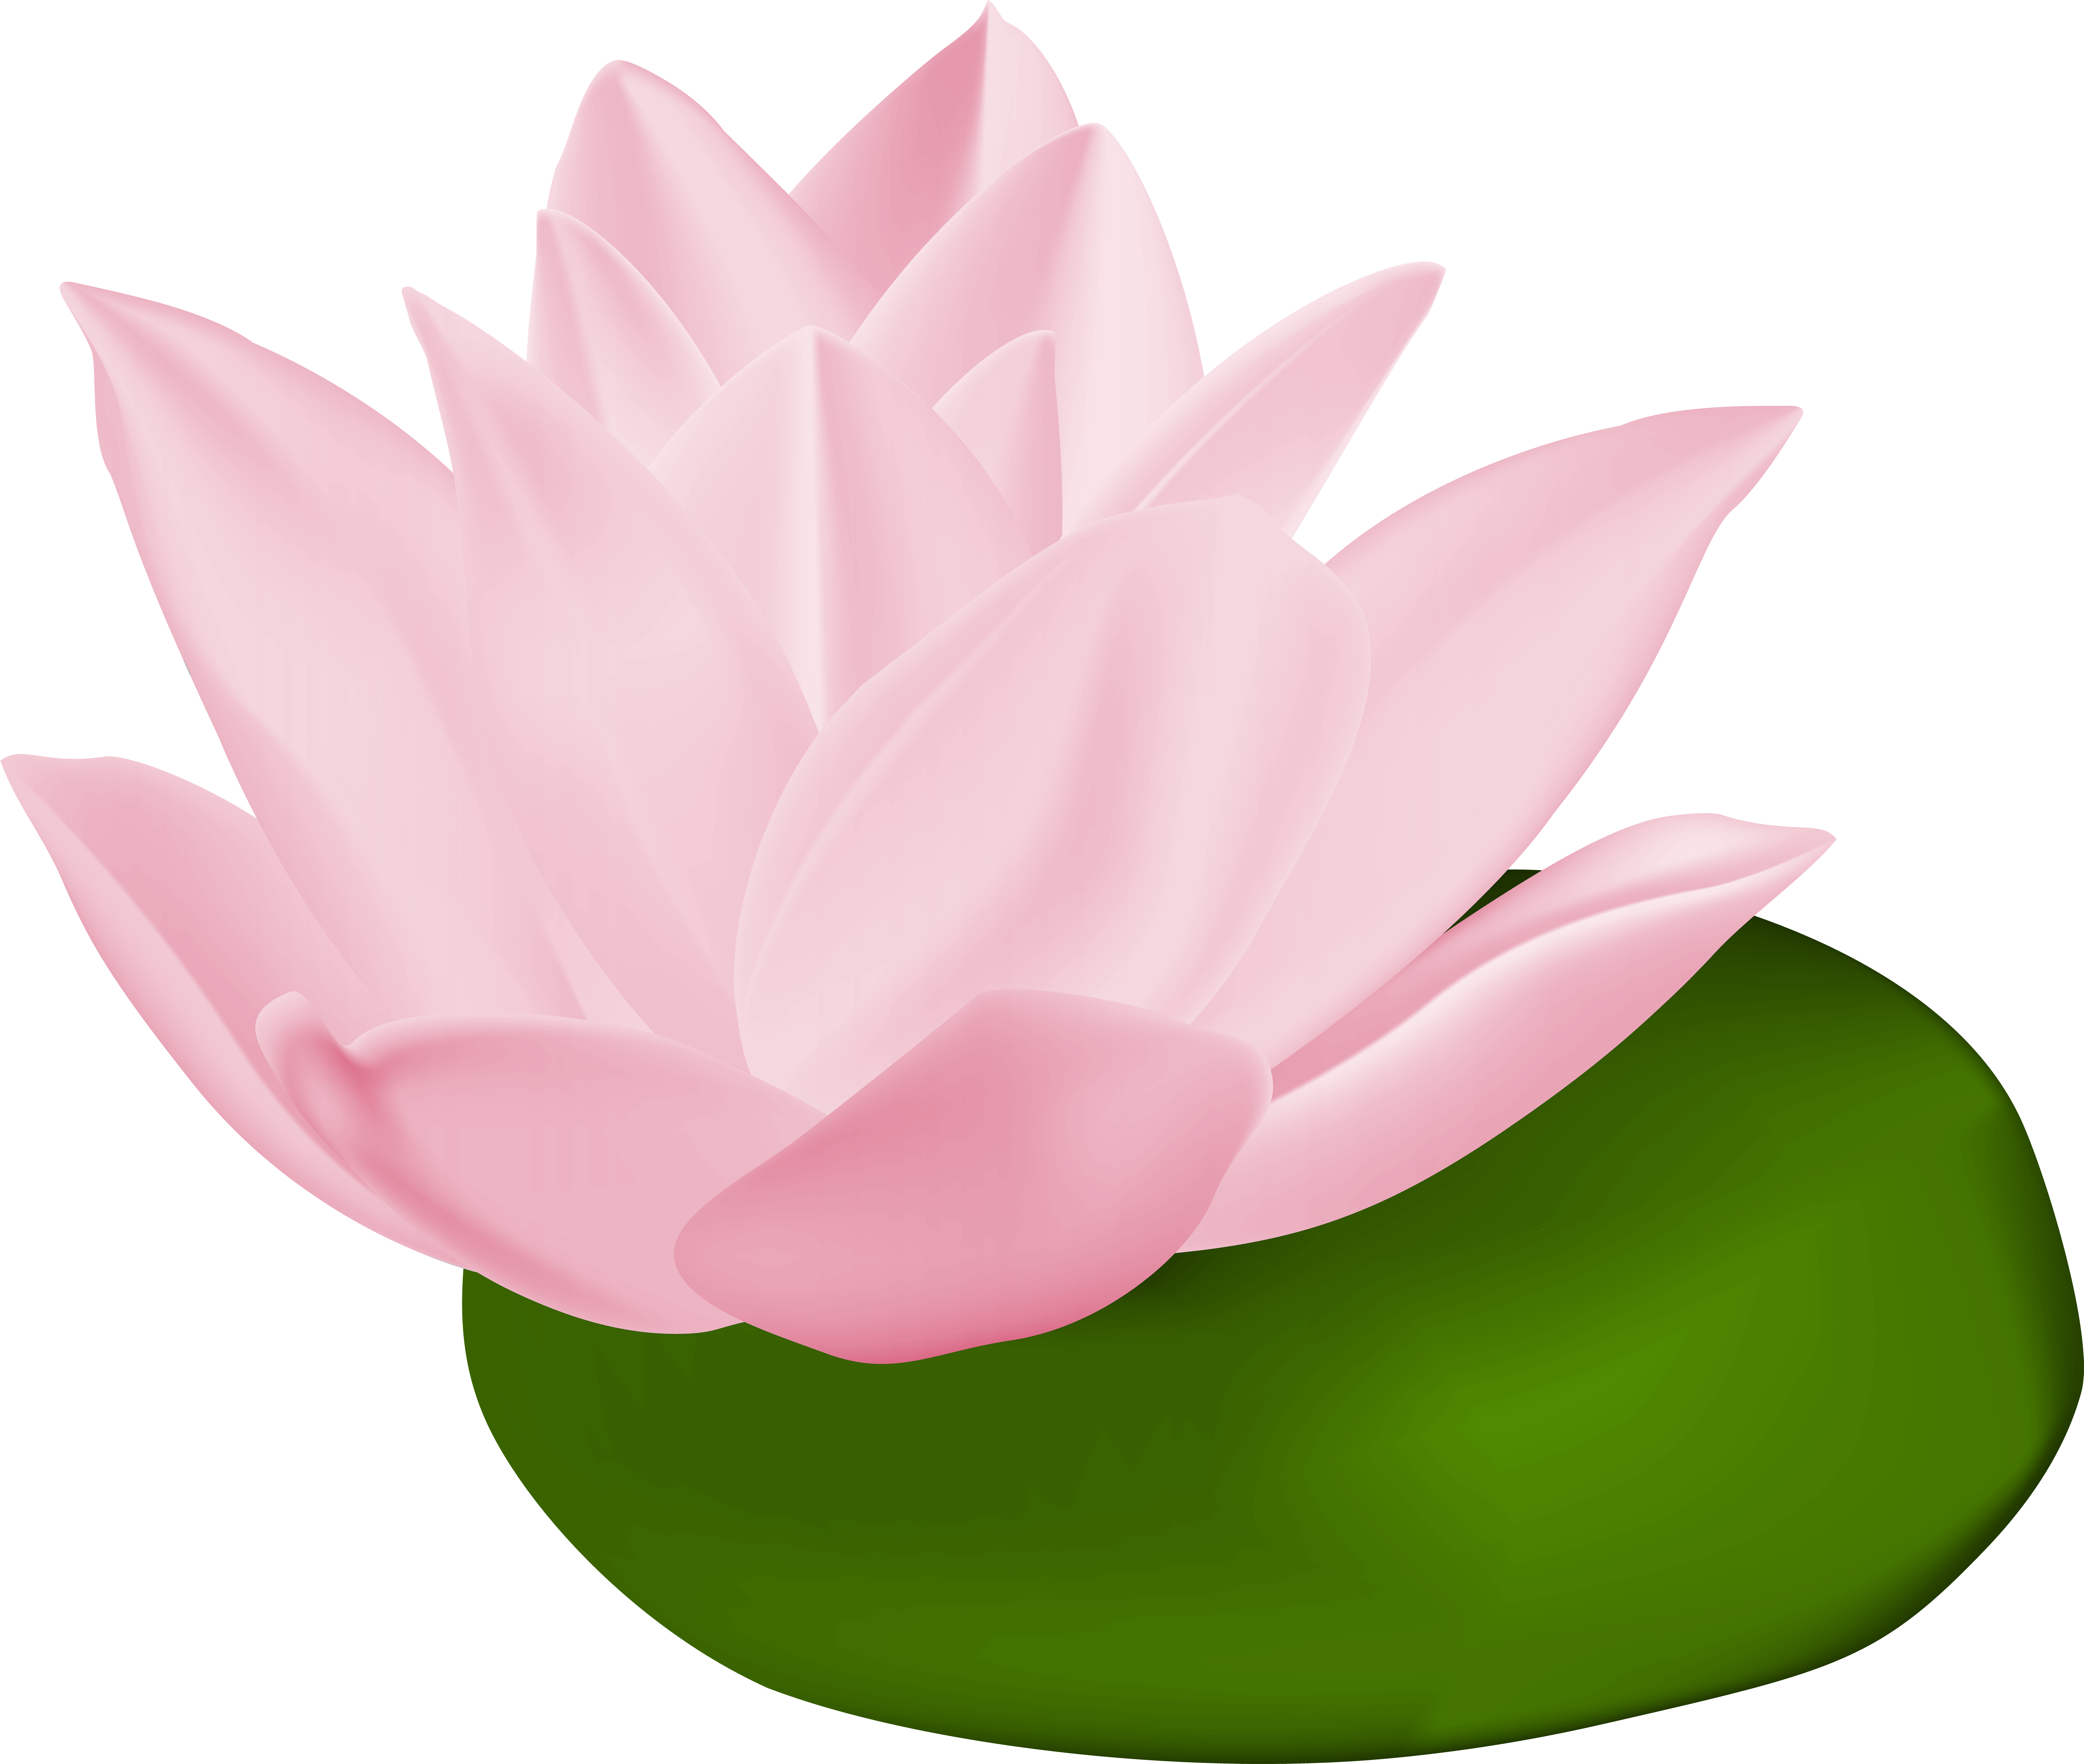 A Pink Flower On A Green Surface